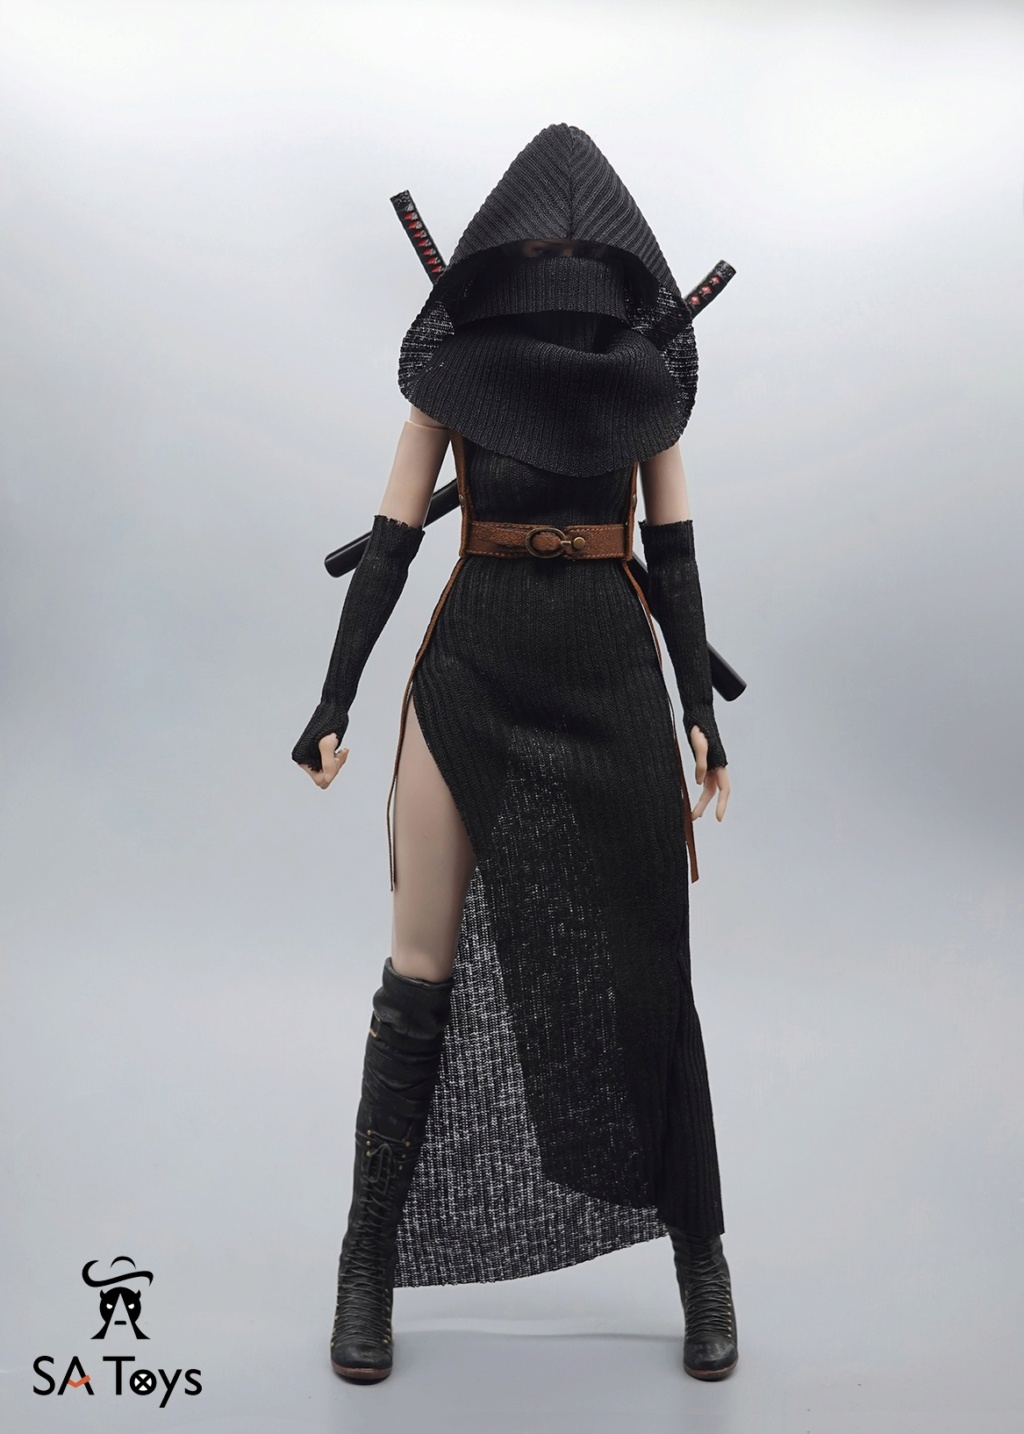 NEW PRODUCT: SA Toys 1/6 Apocalyptic Dune Palace Assassin Dress [Black/Earth Color] 15132510